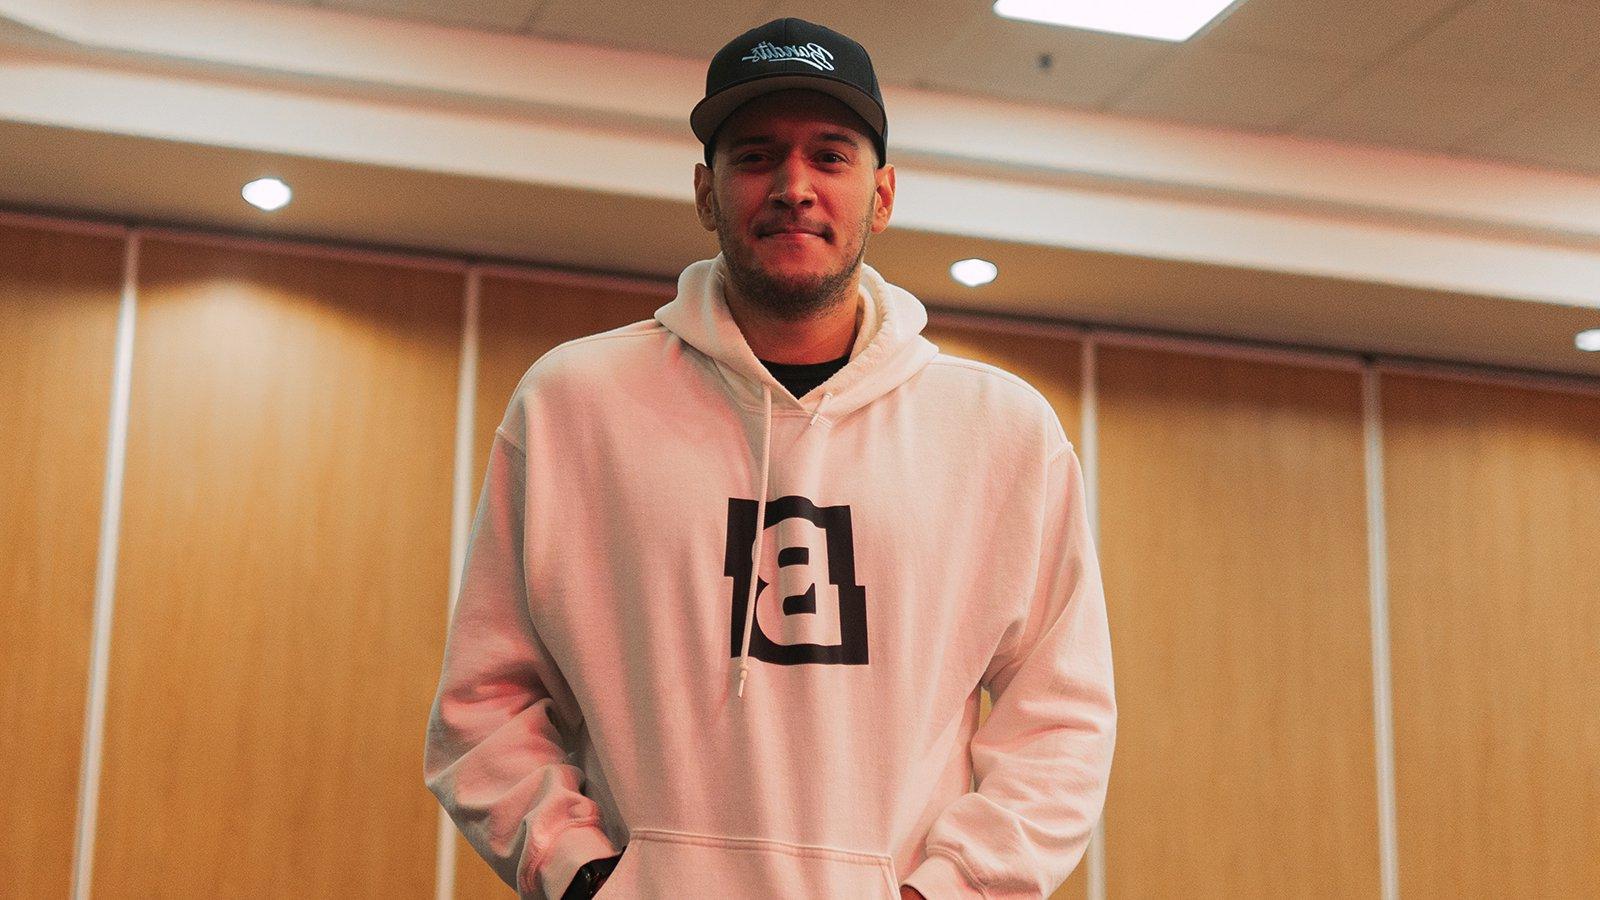 A man standing against a wood paneled wall in a white hooded sweatshirt featuring the Bandits logo and a black Bandits Gaming snapback cap.